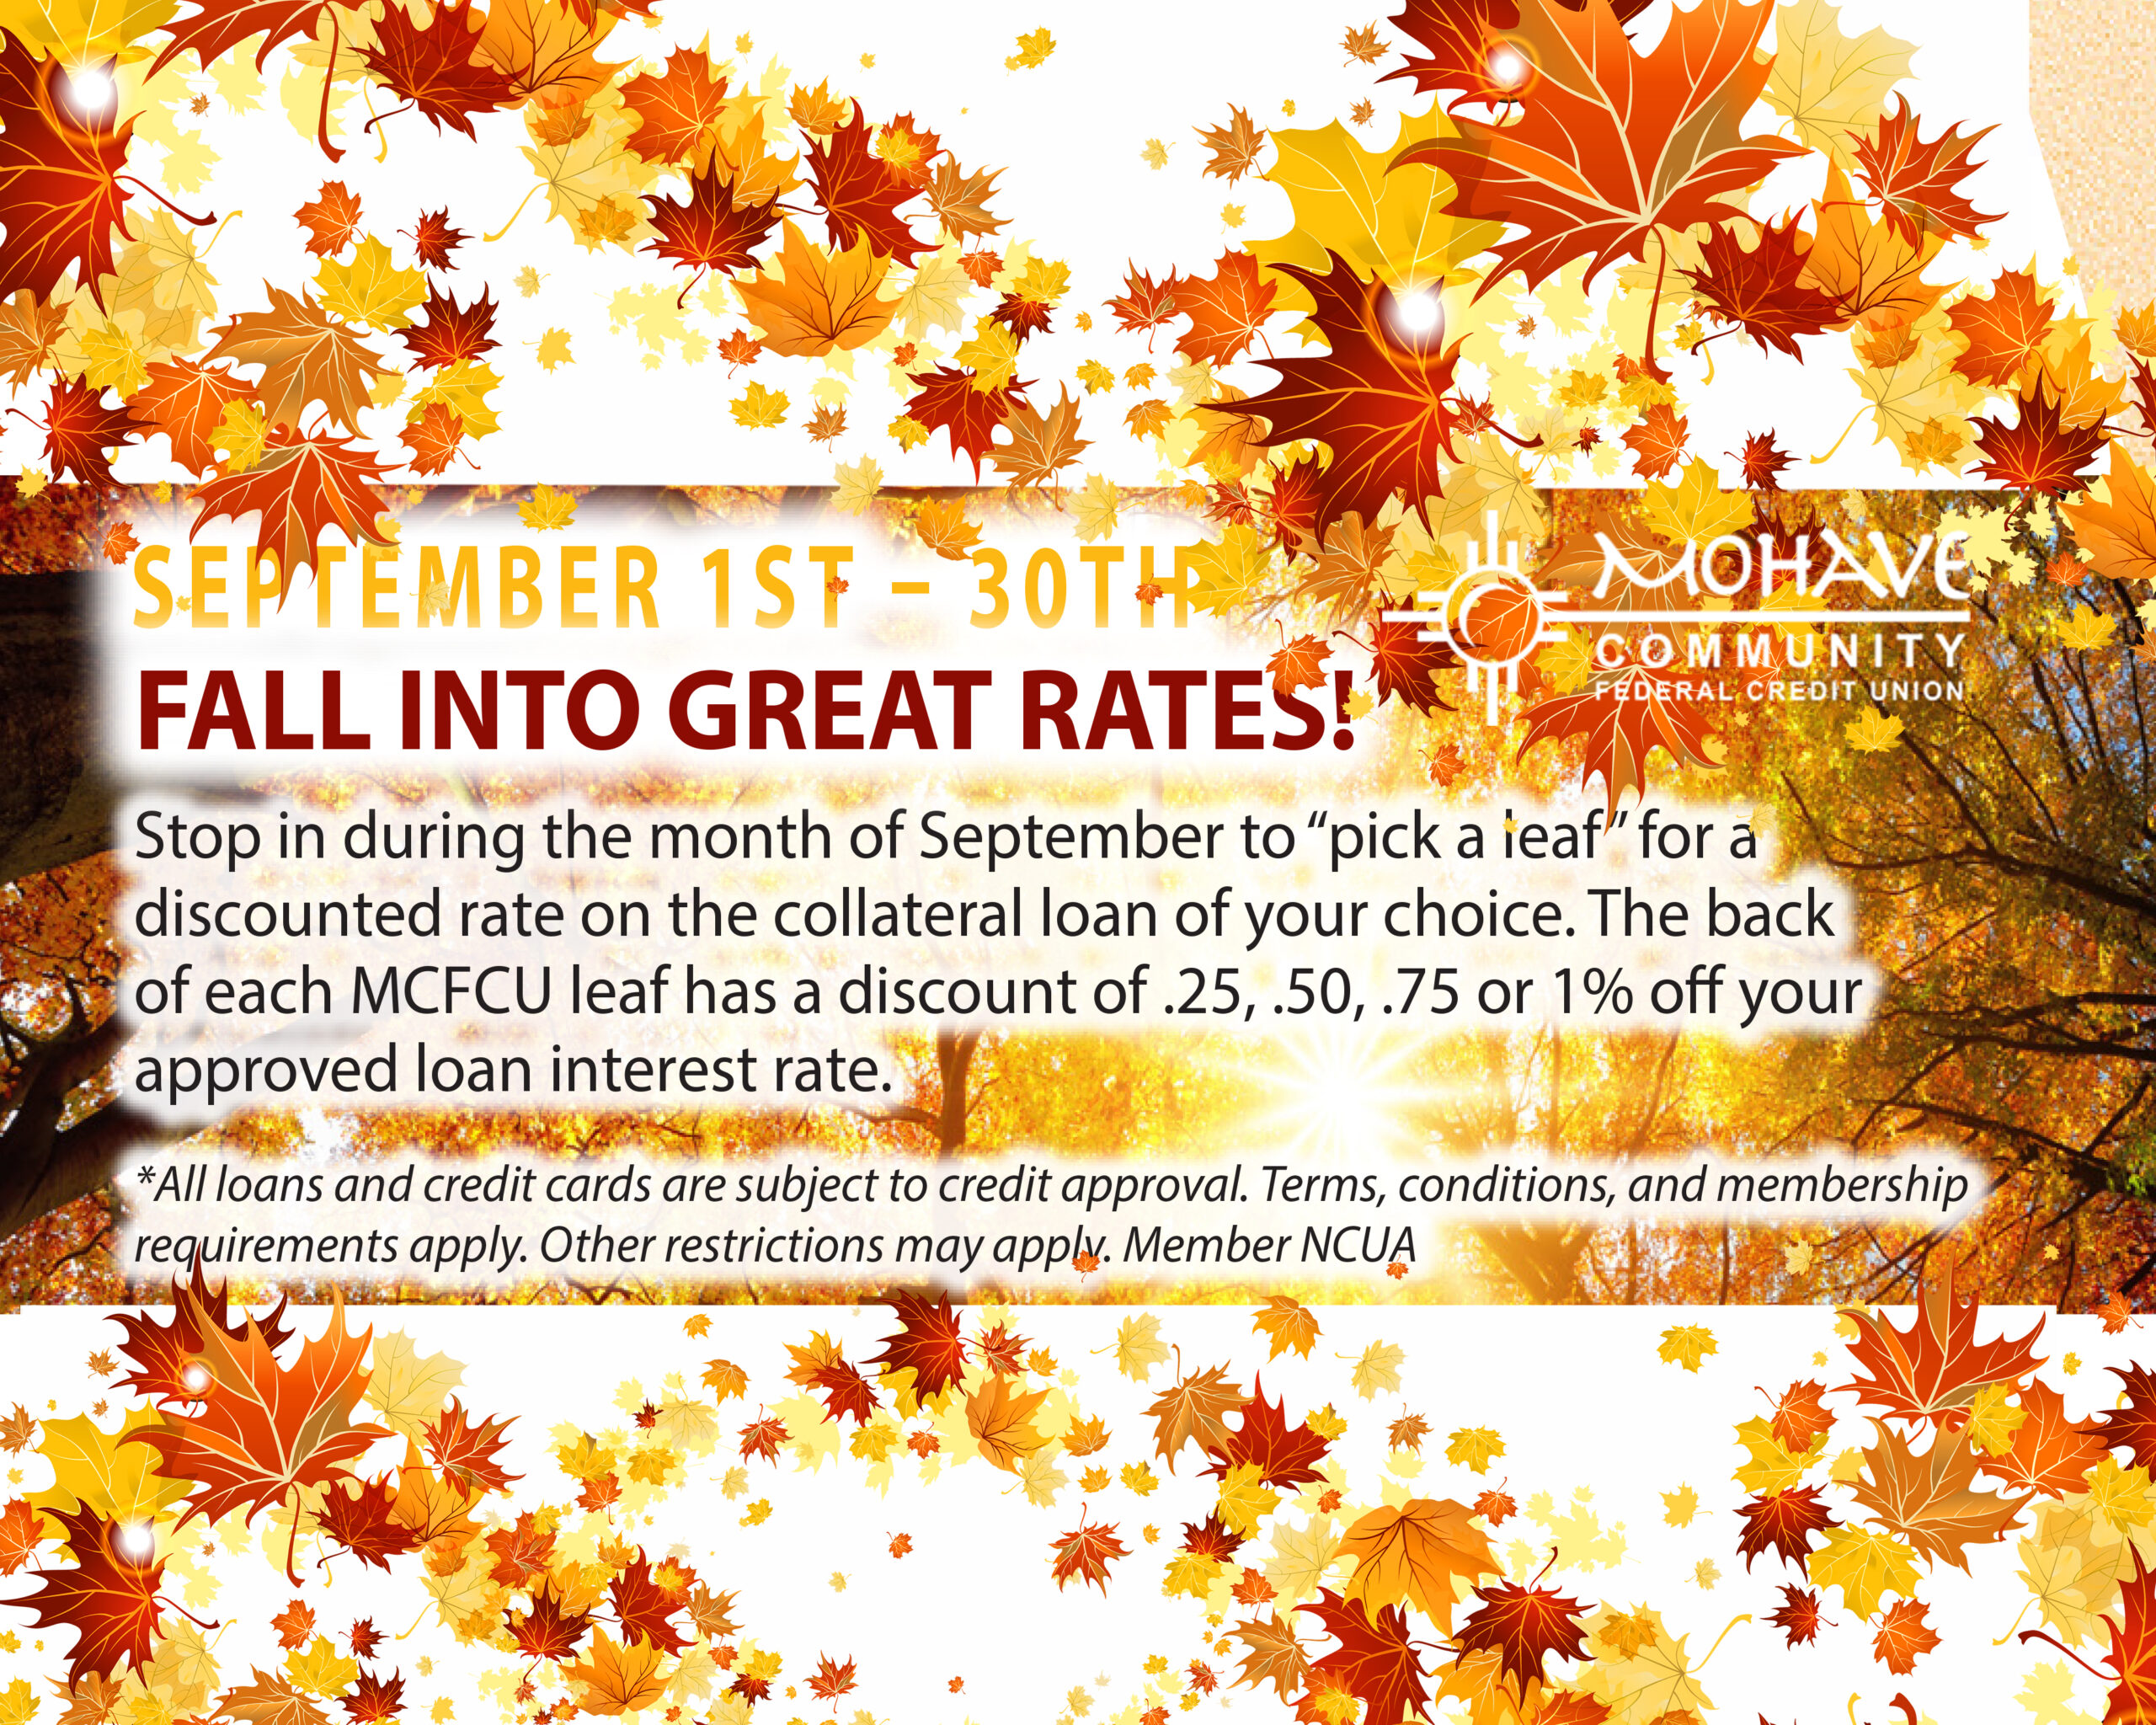 Fall into Great Rates! September 1st - September 30th. Pick a leaf for a discounted rate! Special Conditions Apply! Call us at 928-753-8000 for more details!